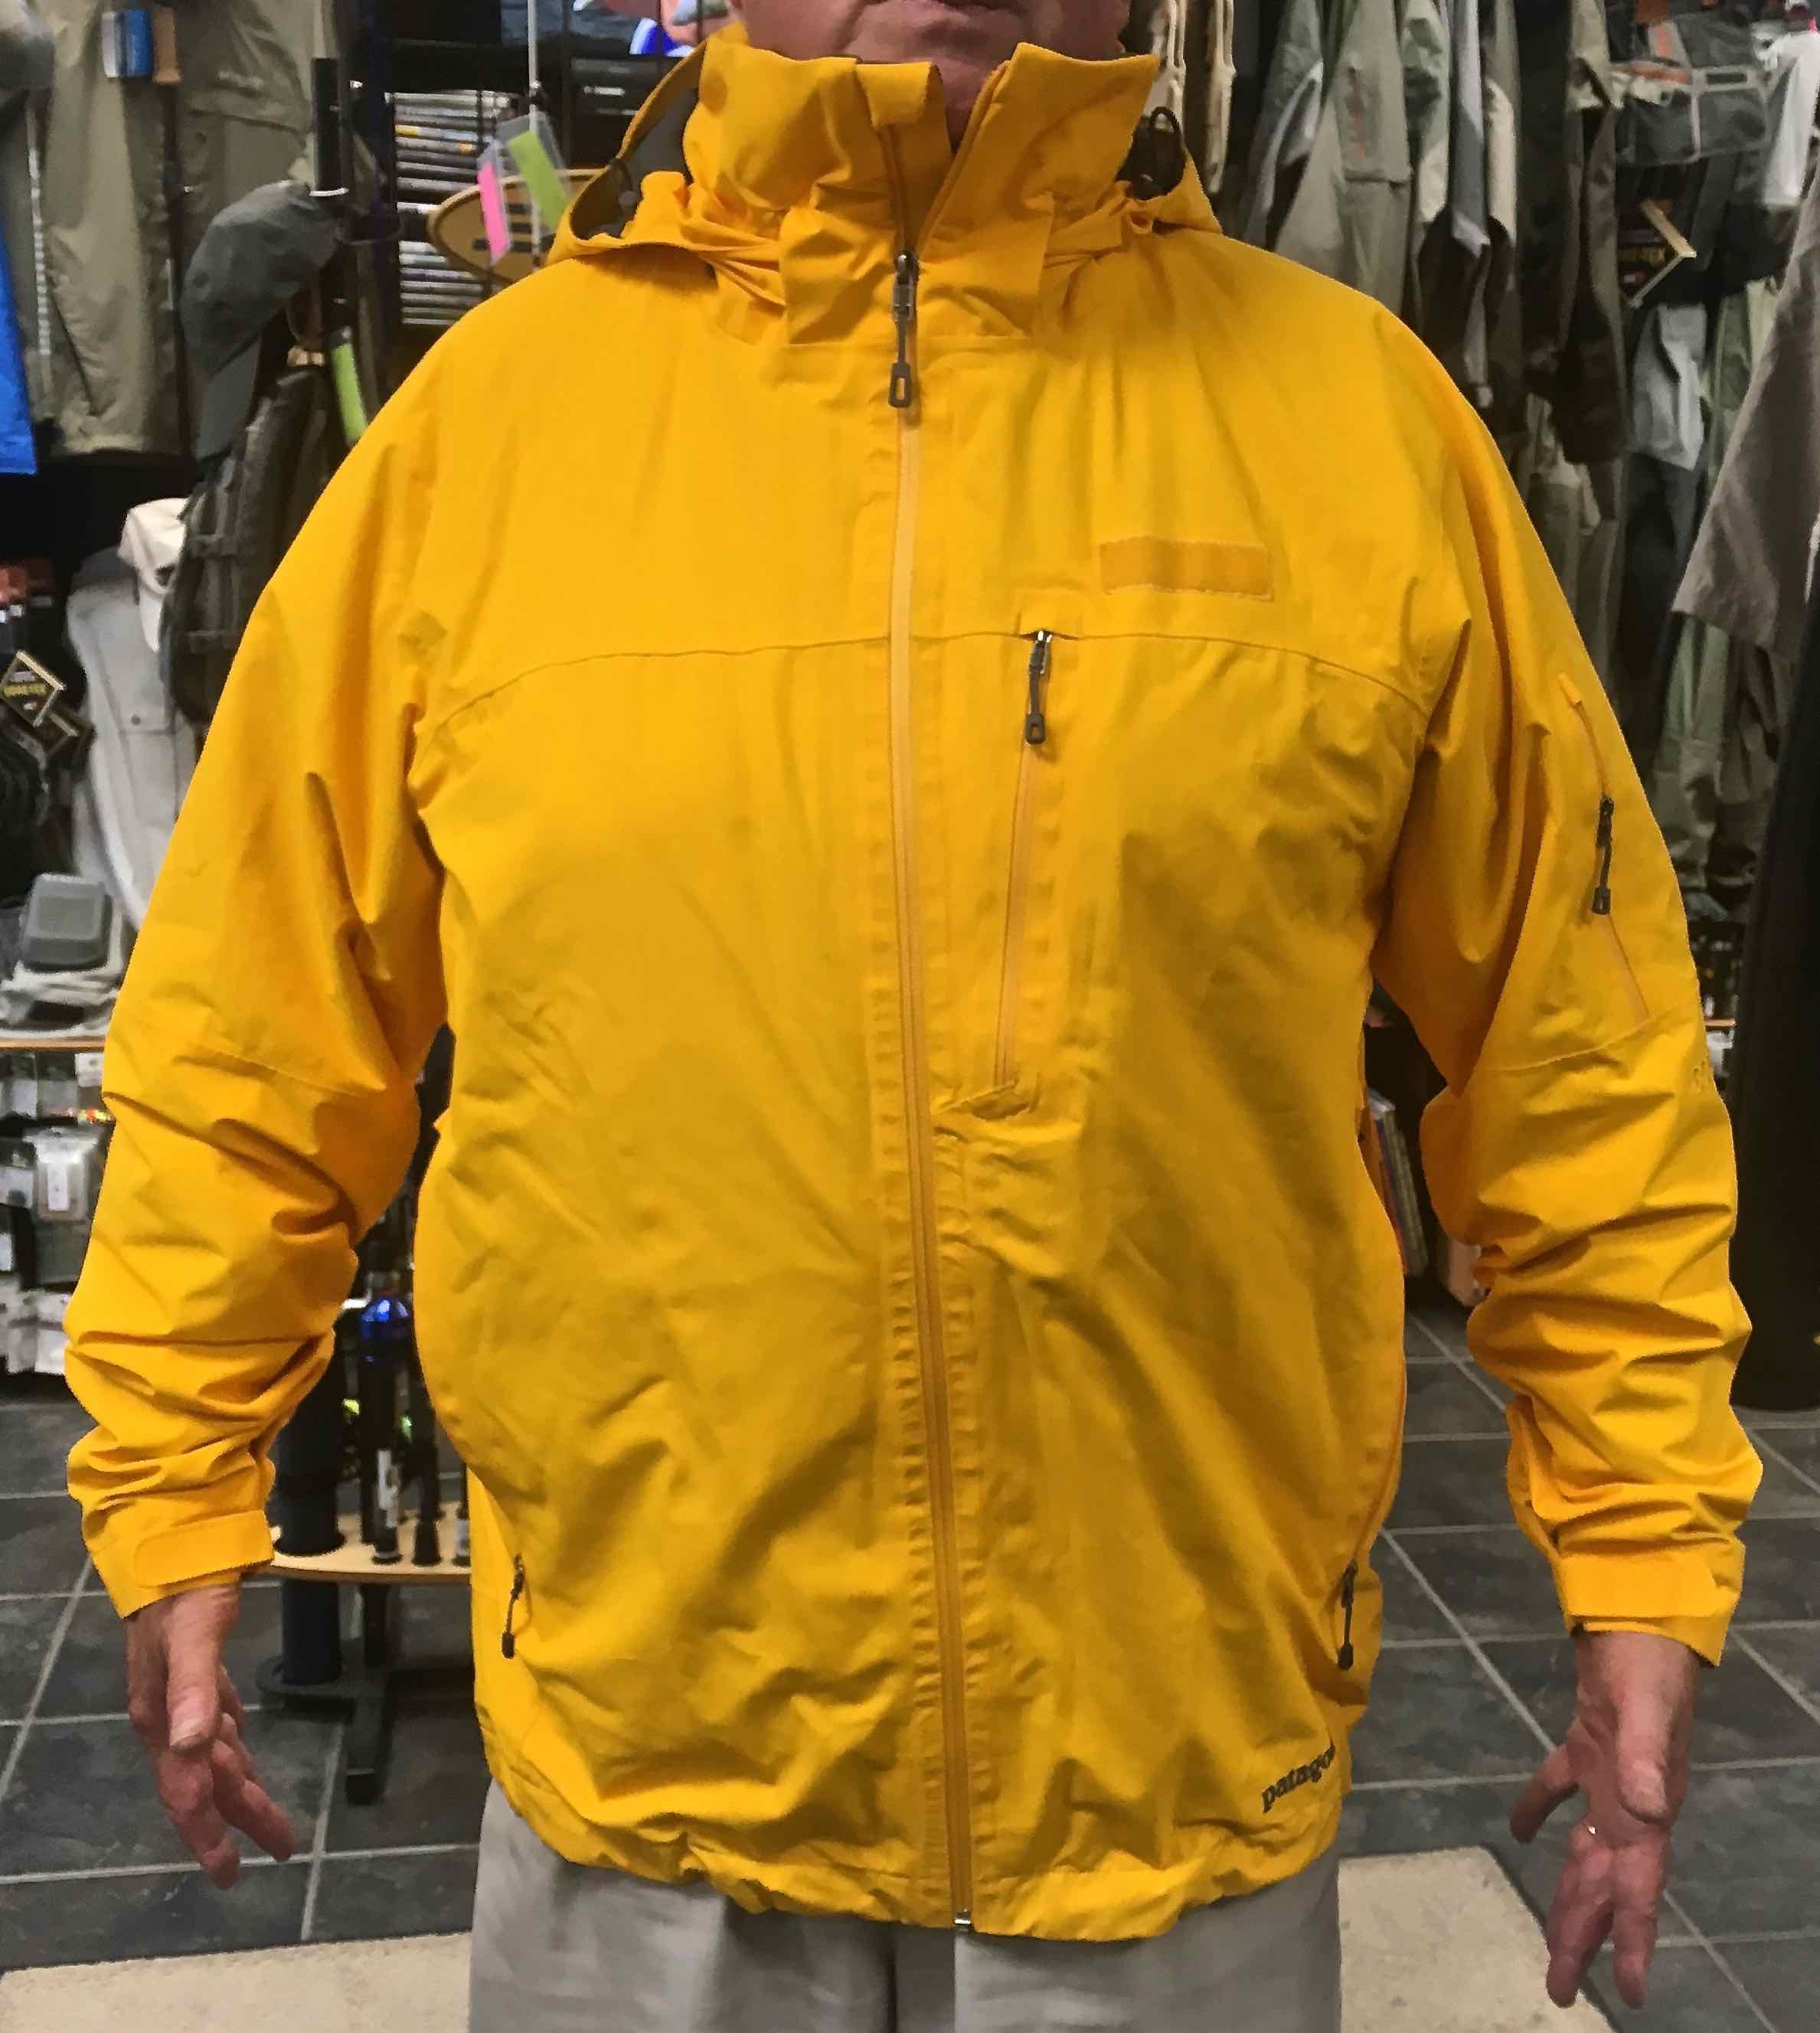 SOLD! – Patagonia Men's Primo Gore-Tex Jacket c/w Embedded RECCO